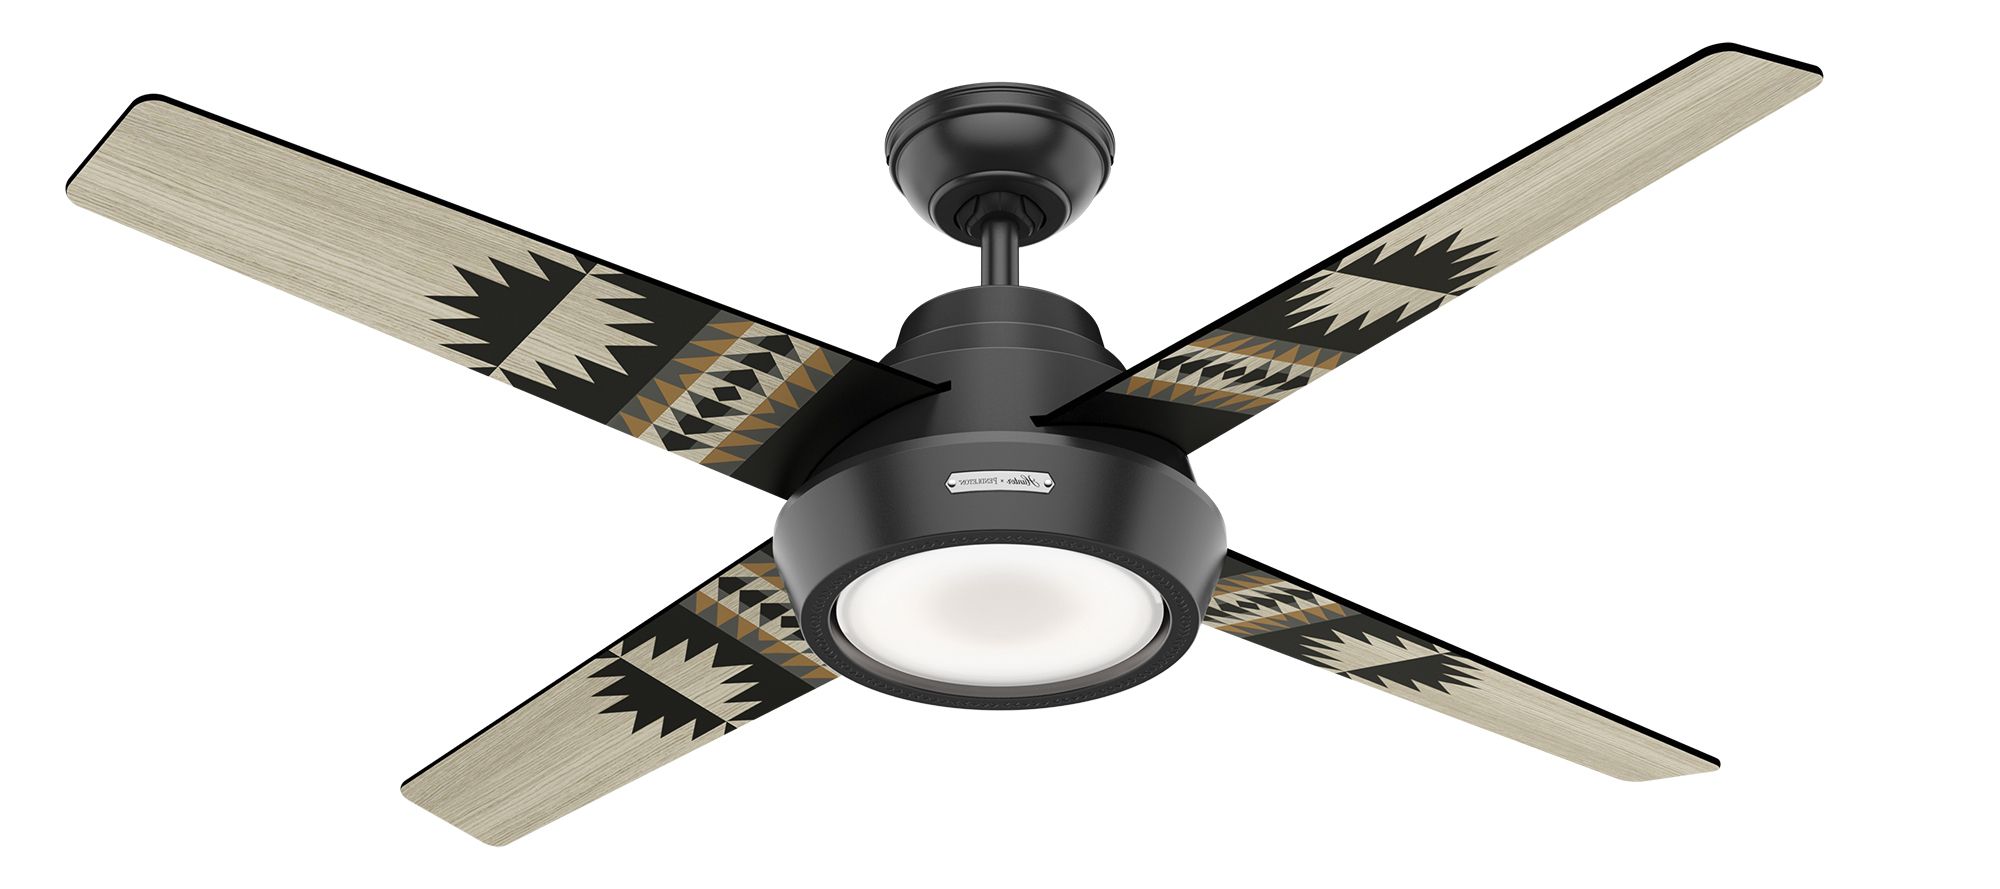 2019 Spider Rock With Led Light 54 Inch Ceiling Fan (Photo 11 of 20)